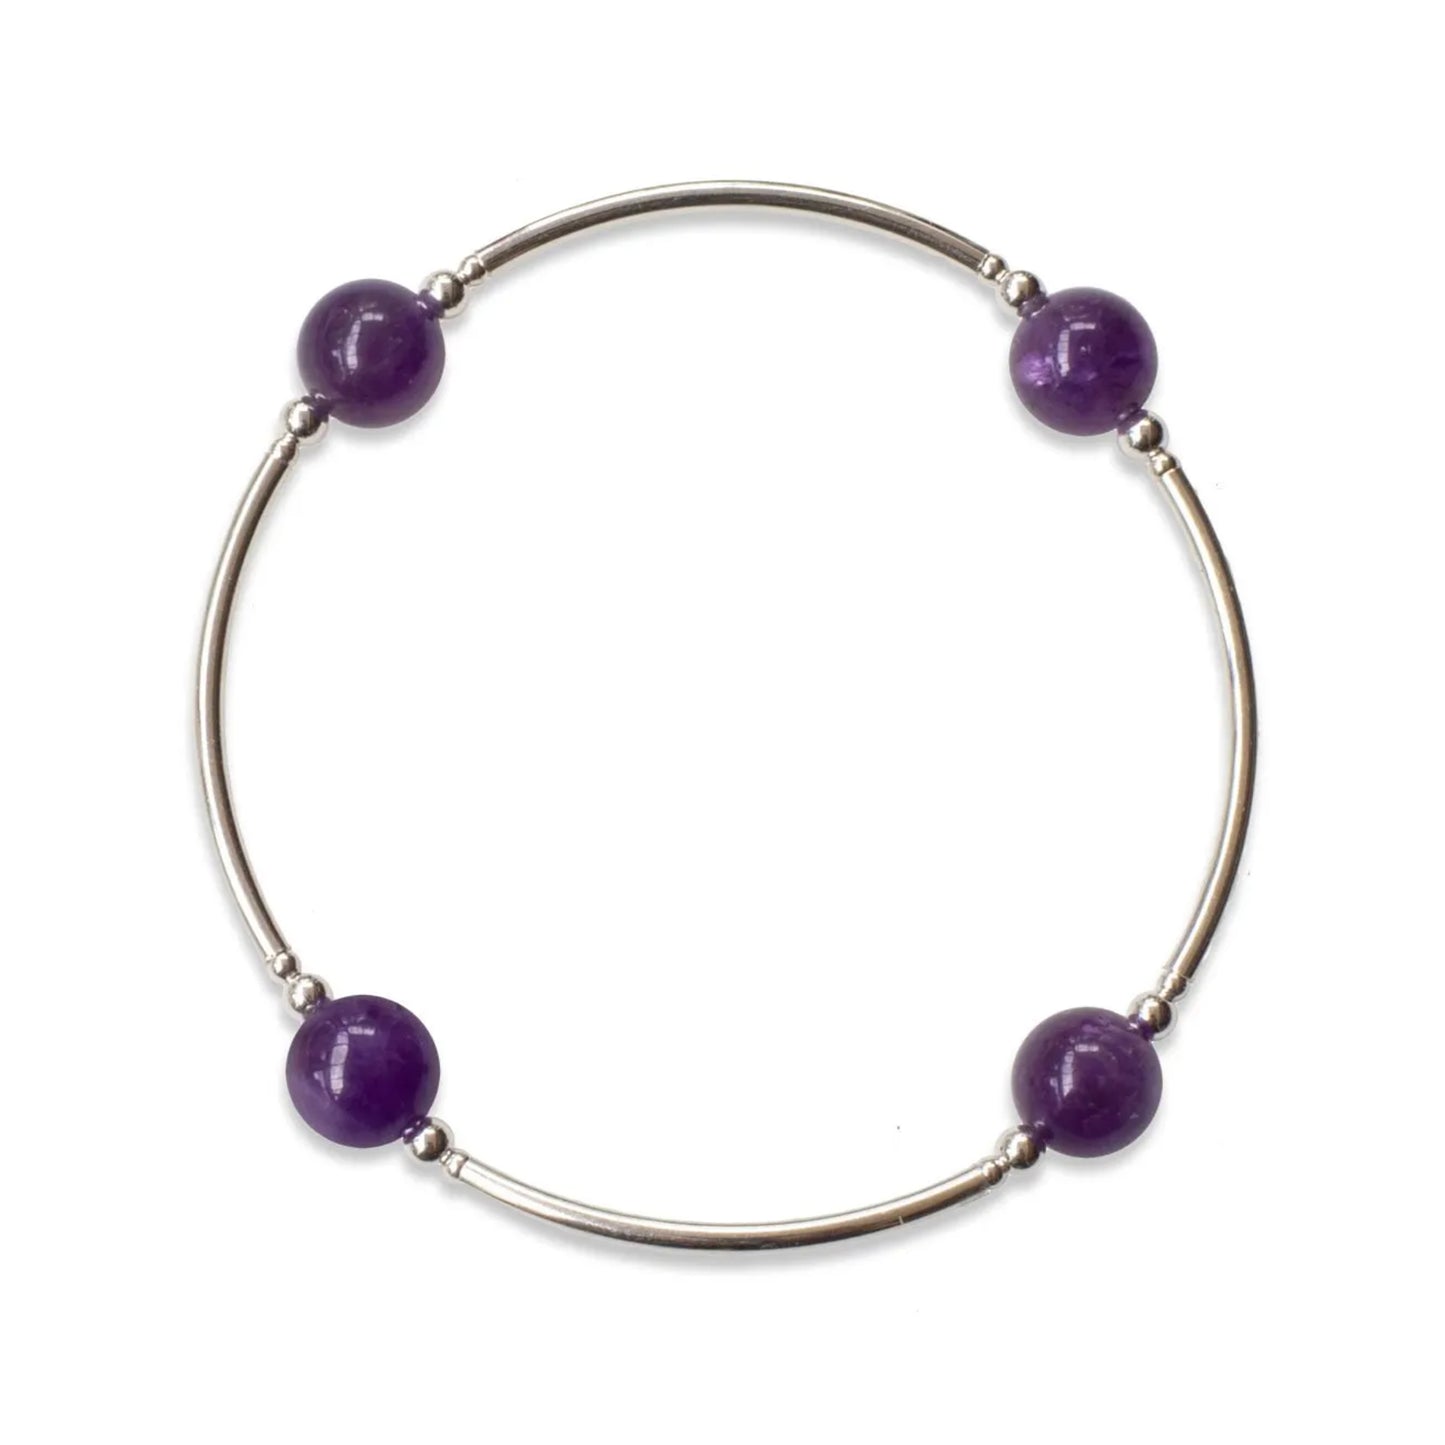 Made As Intended 8mm Amethyst Blessing Bracelet - Silver Links available at The Good Life Boutique